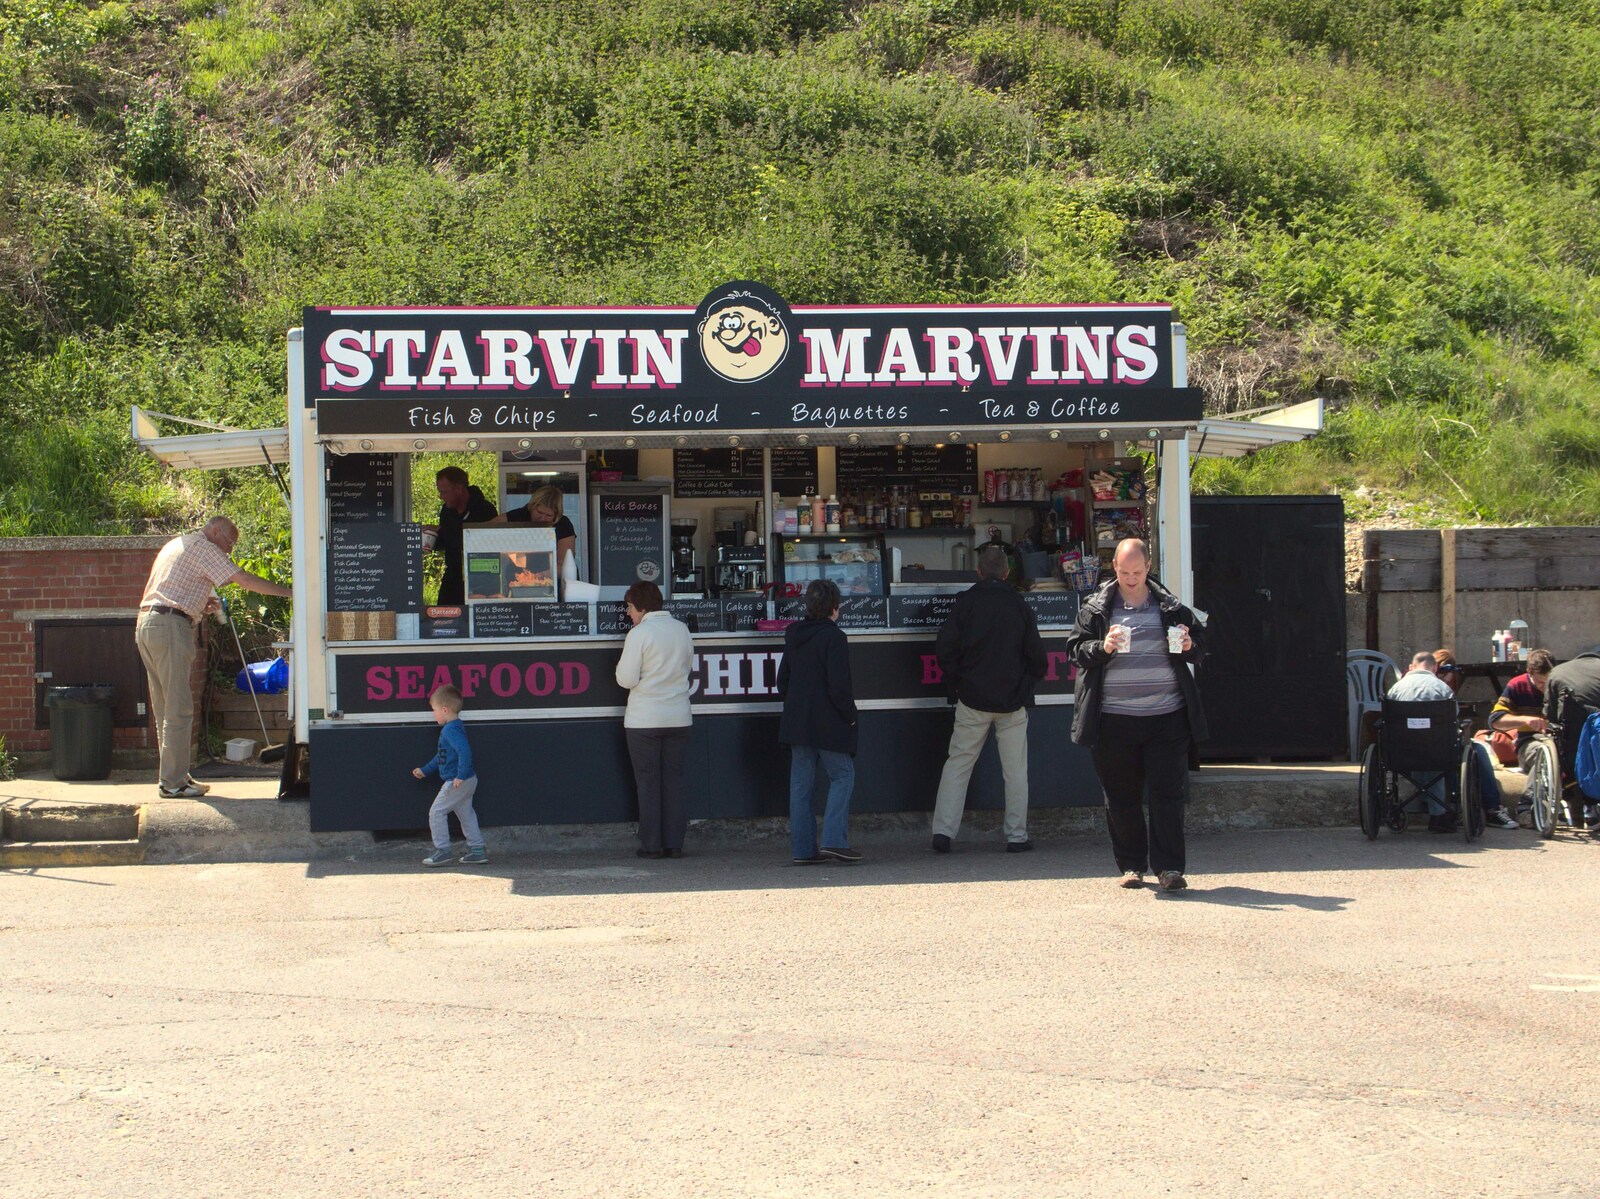 Starvin Marvin's food van from A Birthday Camping Trip, East Runton, North Norfolk - 26th May 2015